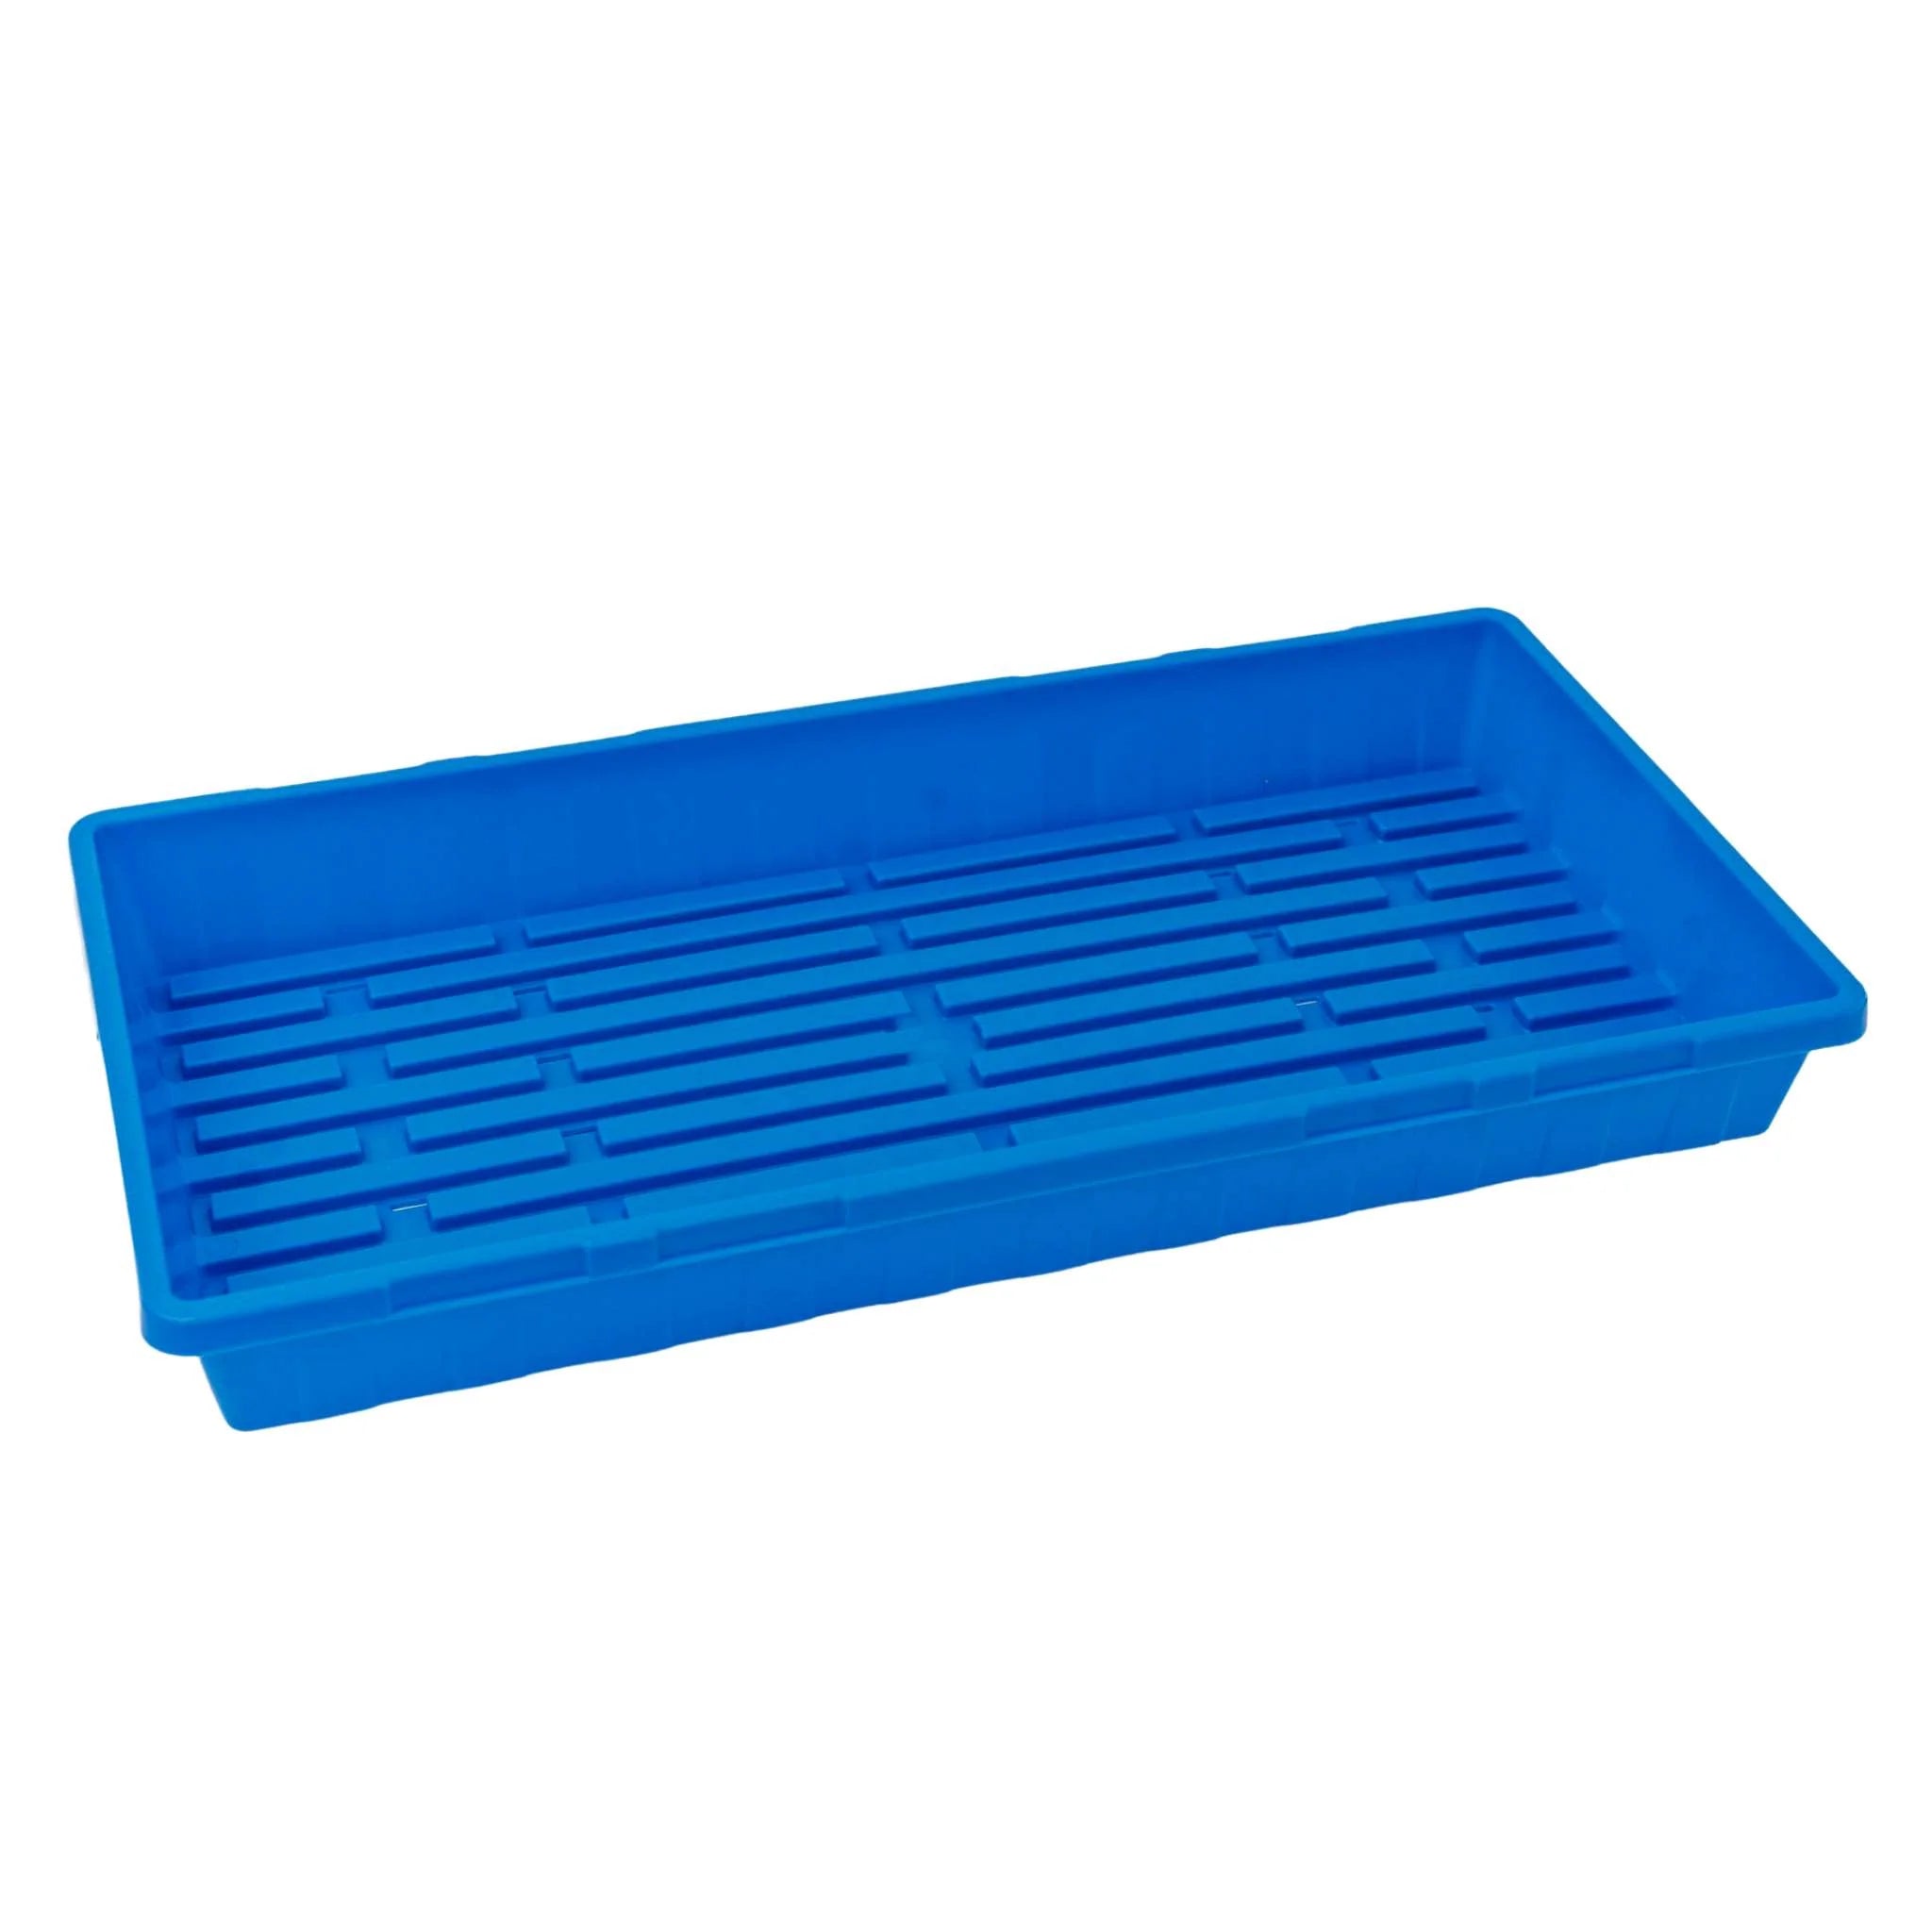 Bootstrap Farmer 1020 Seed Starting Trays, No Holes | Assorted Colors